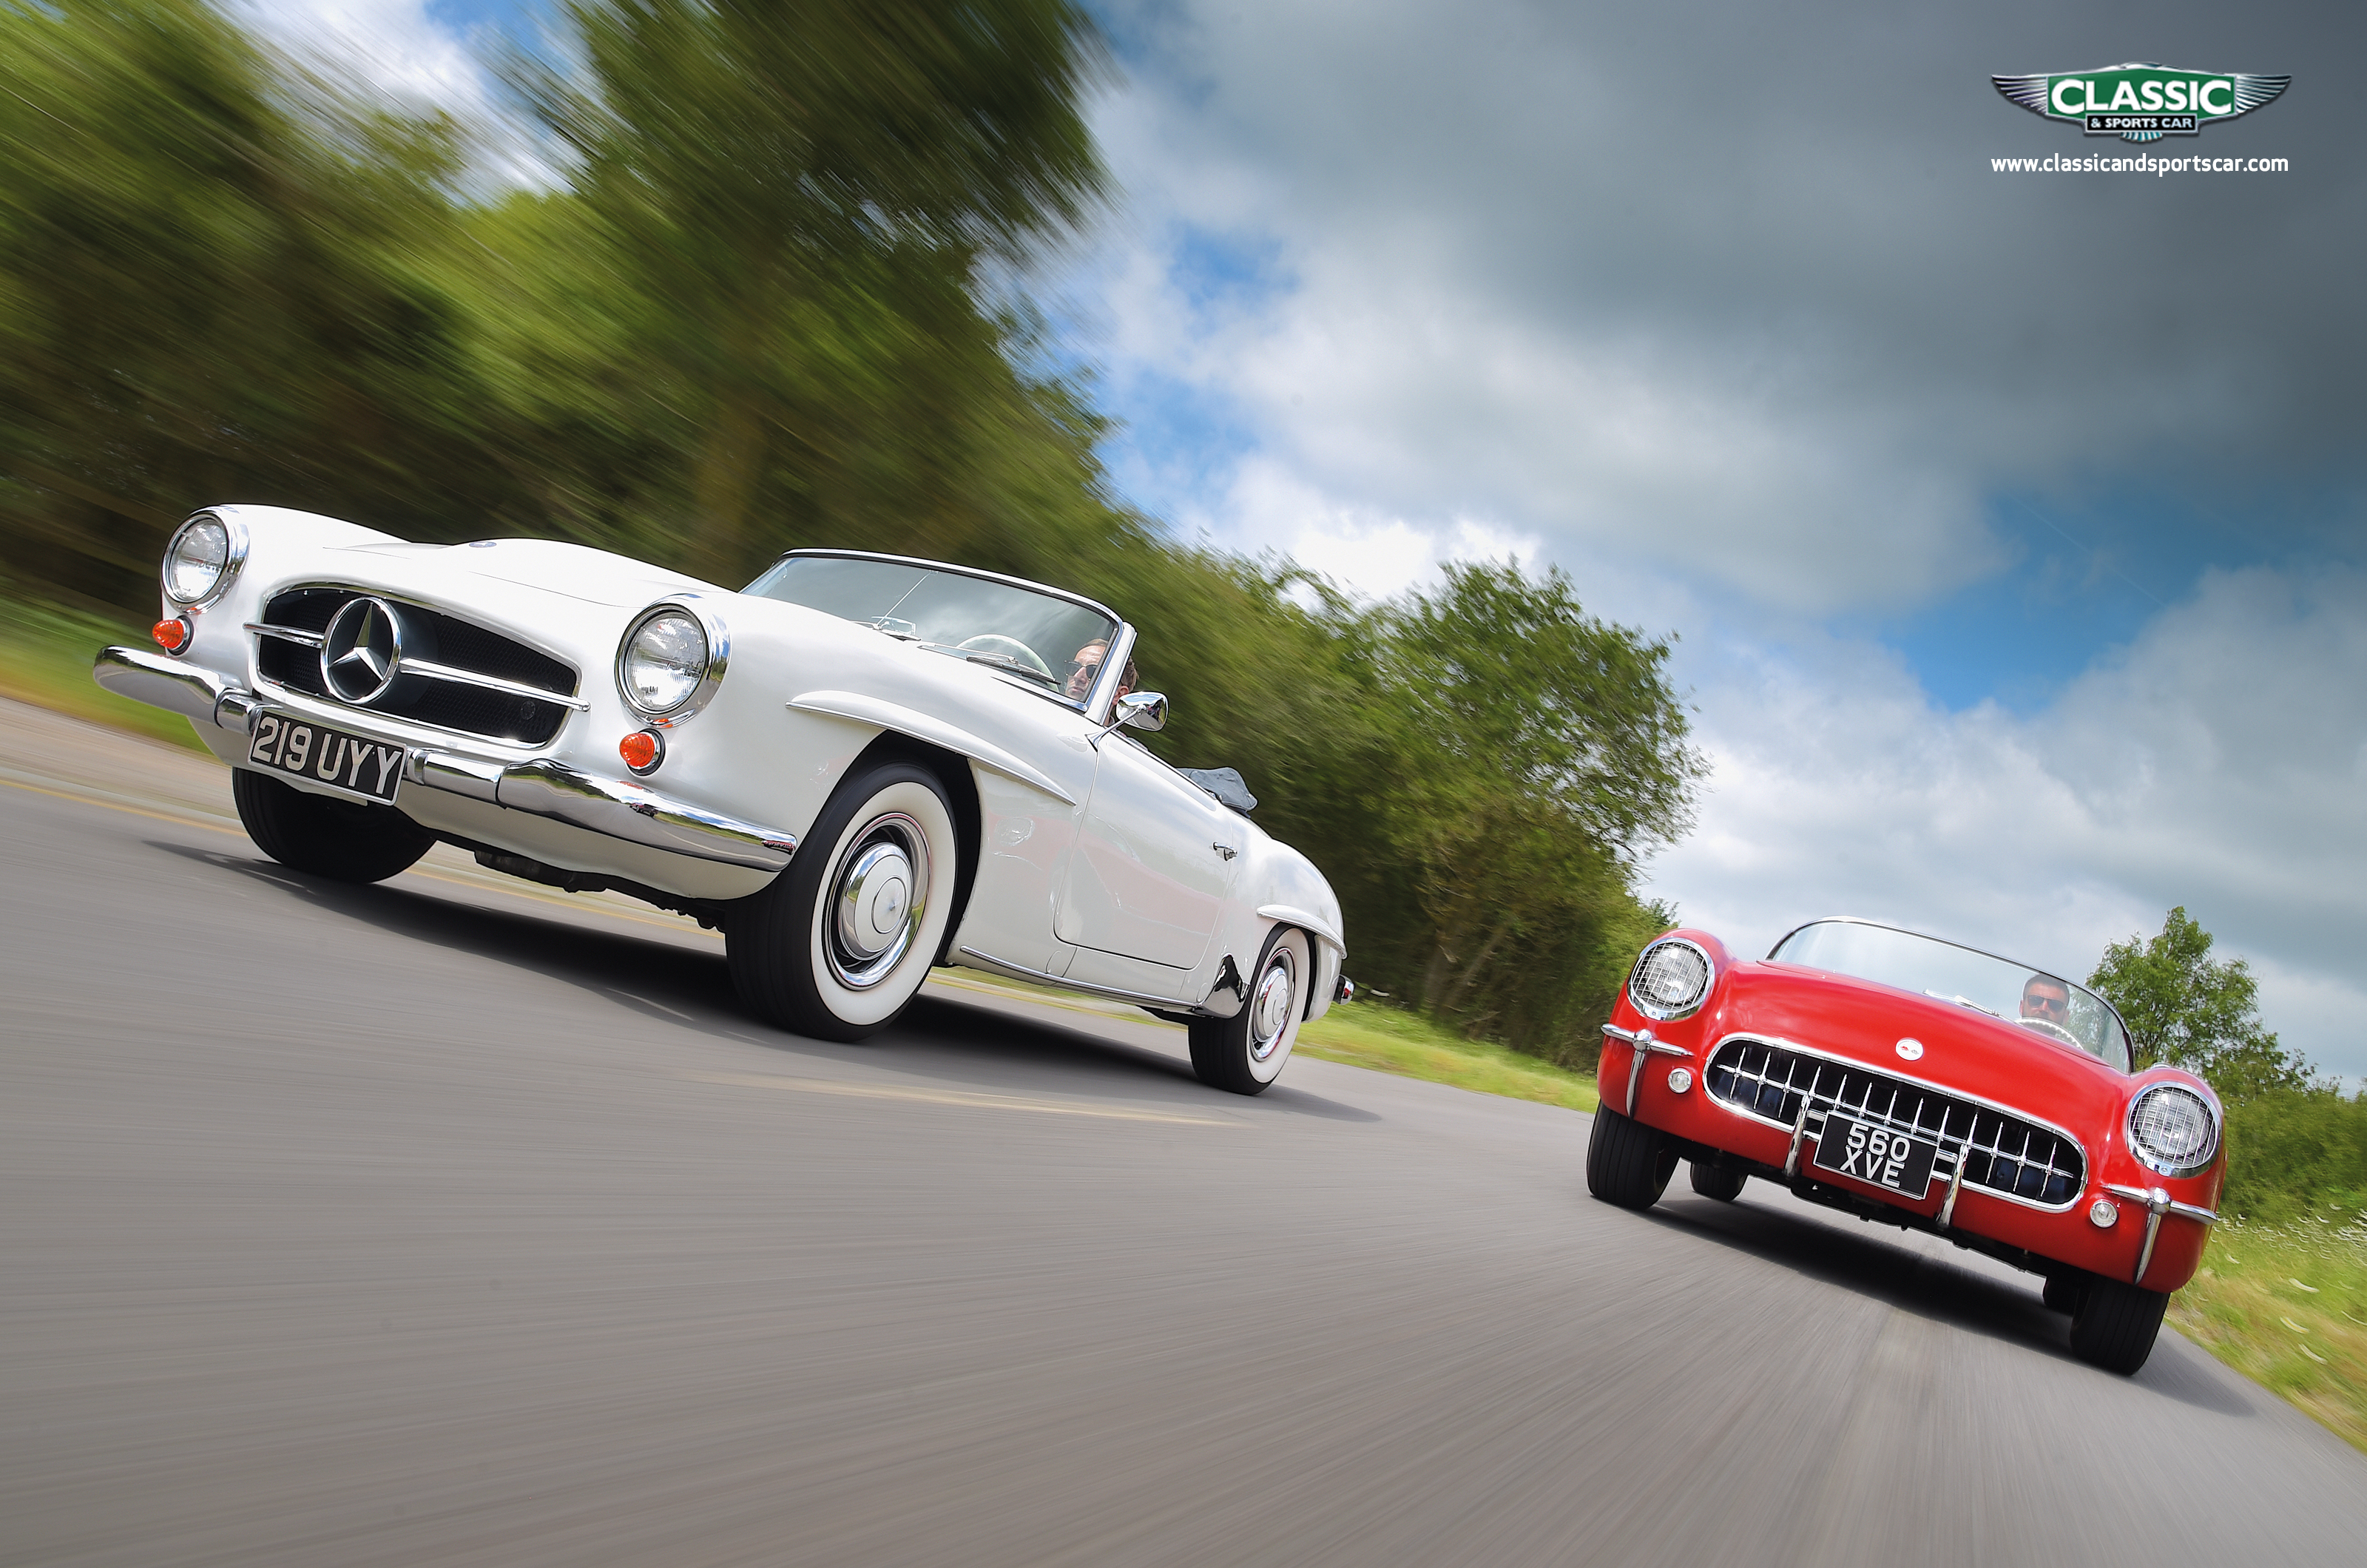 Five beautiful desktop wallpaper from the August 2019 issue. Classic & Sports Car